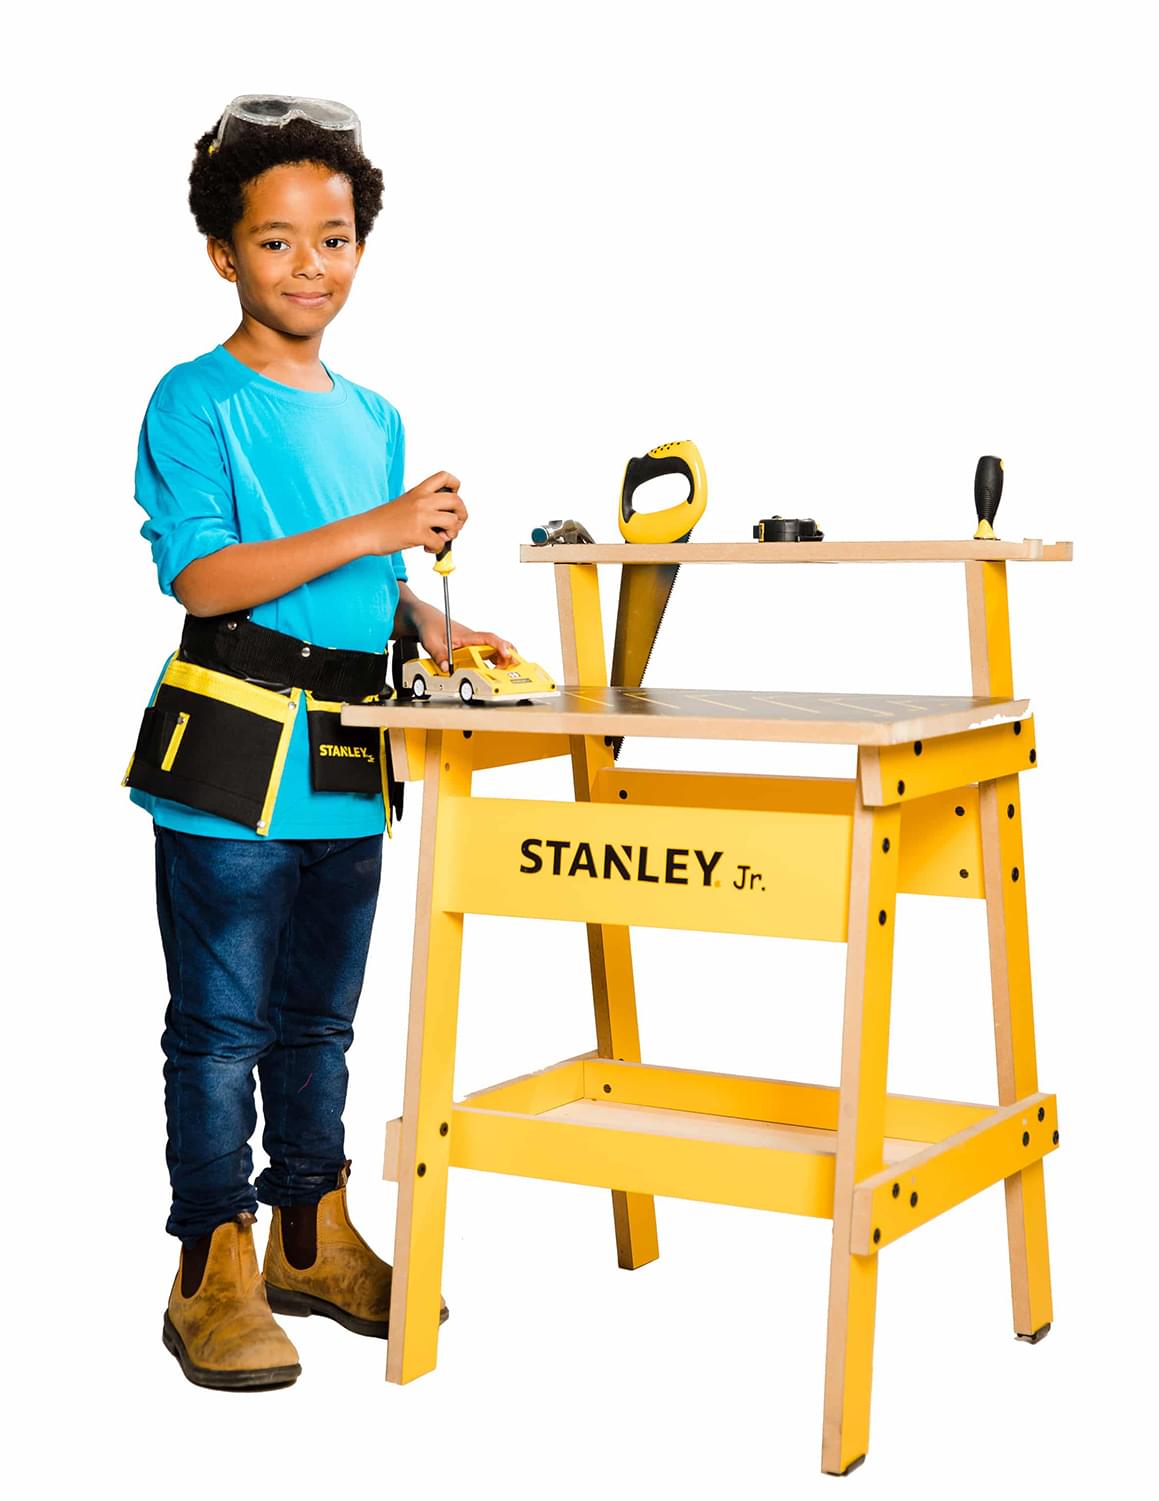 Stanley Jr. Wood Work Bench | Real Tools for Kids